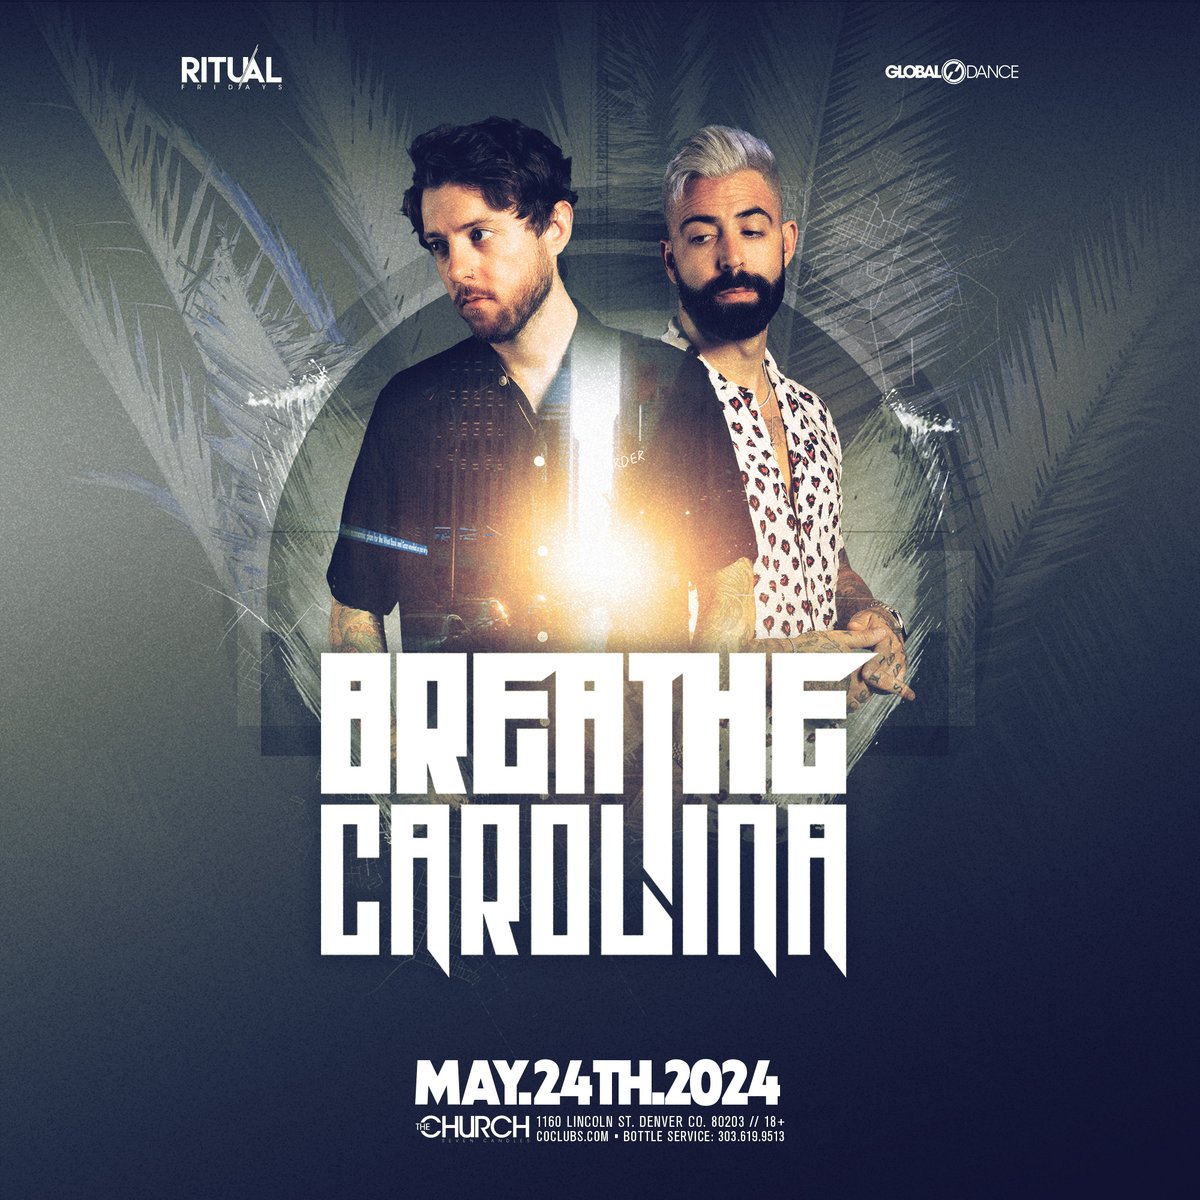 🚨JUST ANNOUNCED🚨 We know it's TOO GOOD to be true, don't BLACKOUT! @breathecarolina is headed to #RITUALFRIDAYS 5.24 🤩✨ Tickets on sale now > bit.ly/ritualxcarolina